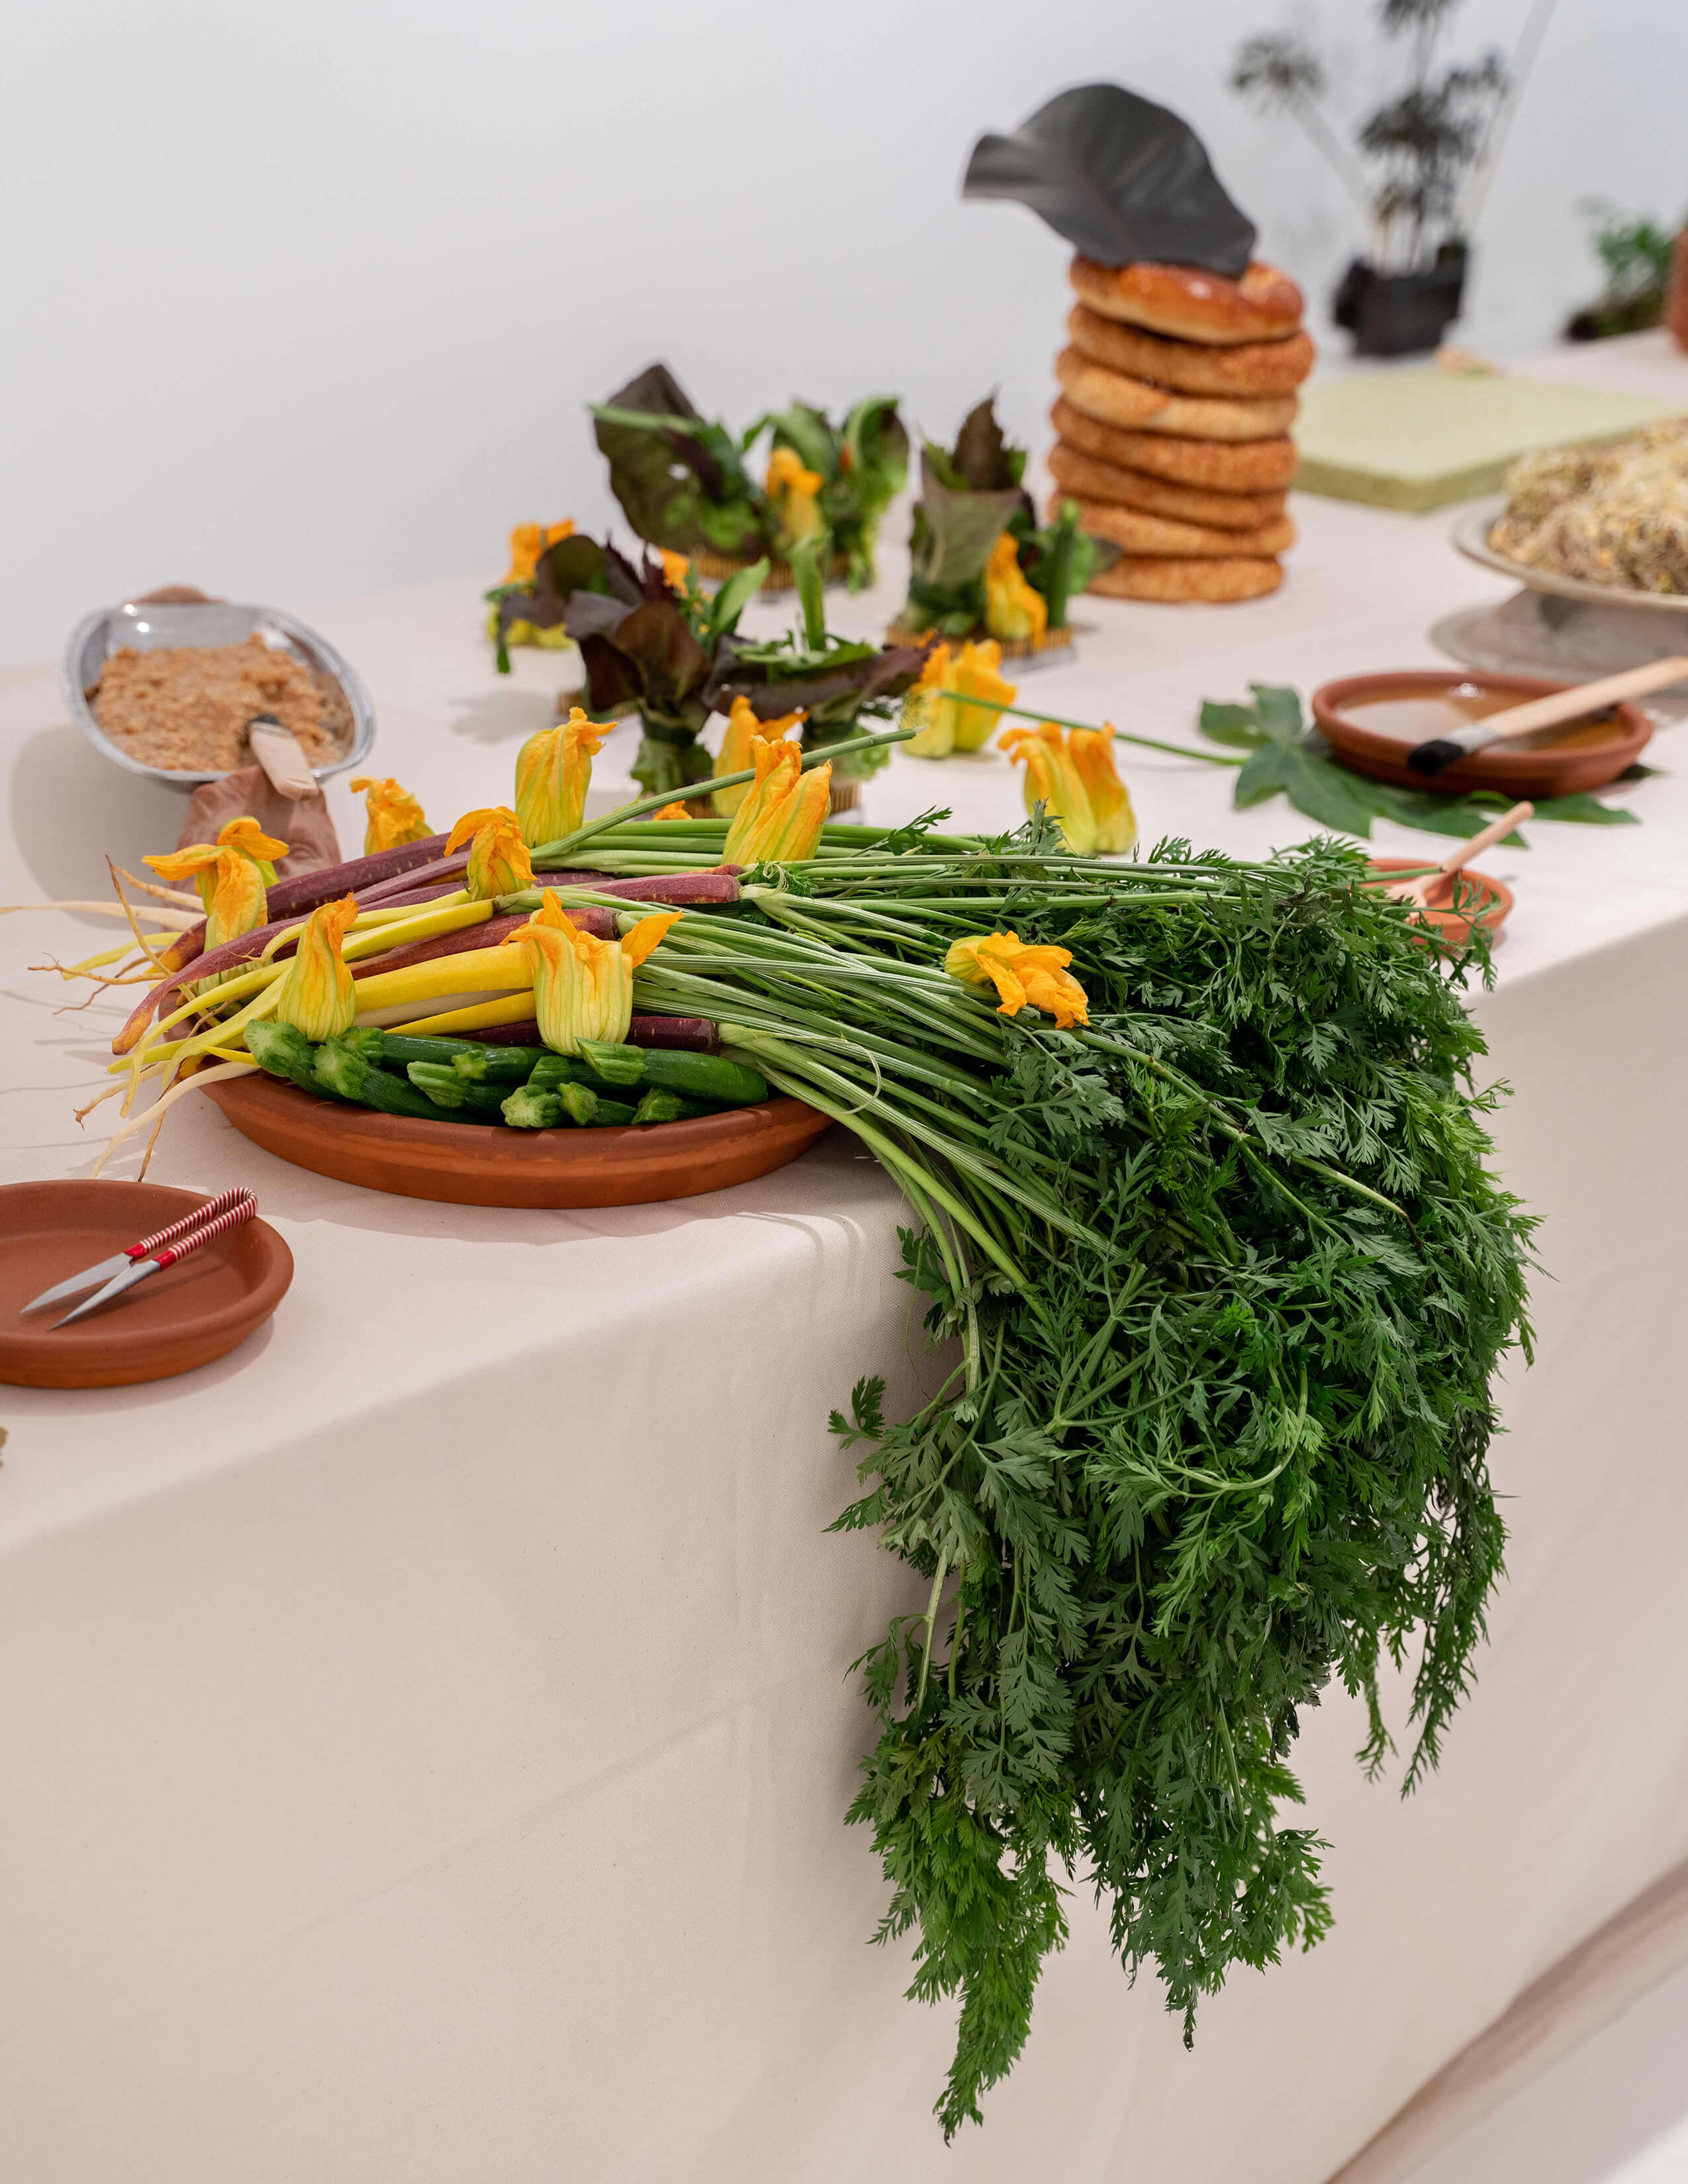 Different kinds of food on the table and there are a bunch of carrots with stems on them, squash blossoms and zucchinis on the plate next to a pair of sewing thread scissors.